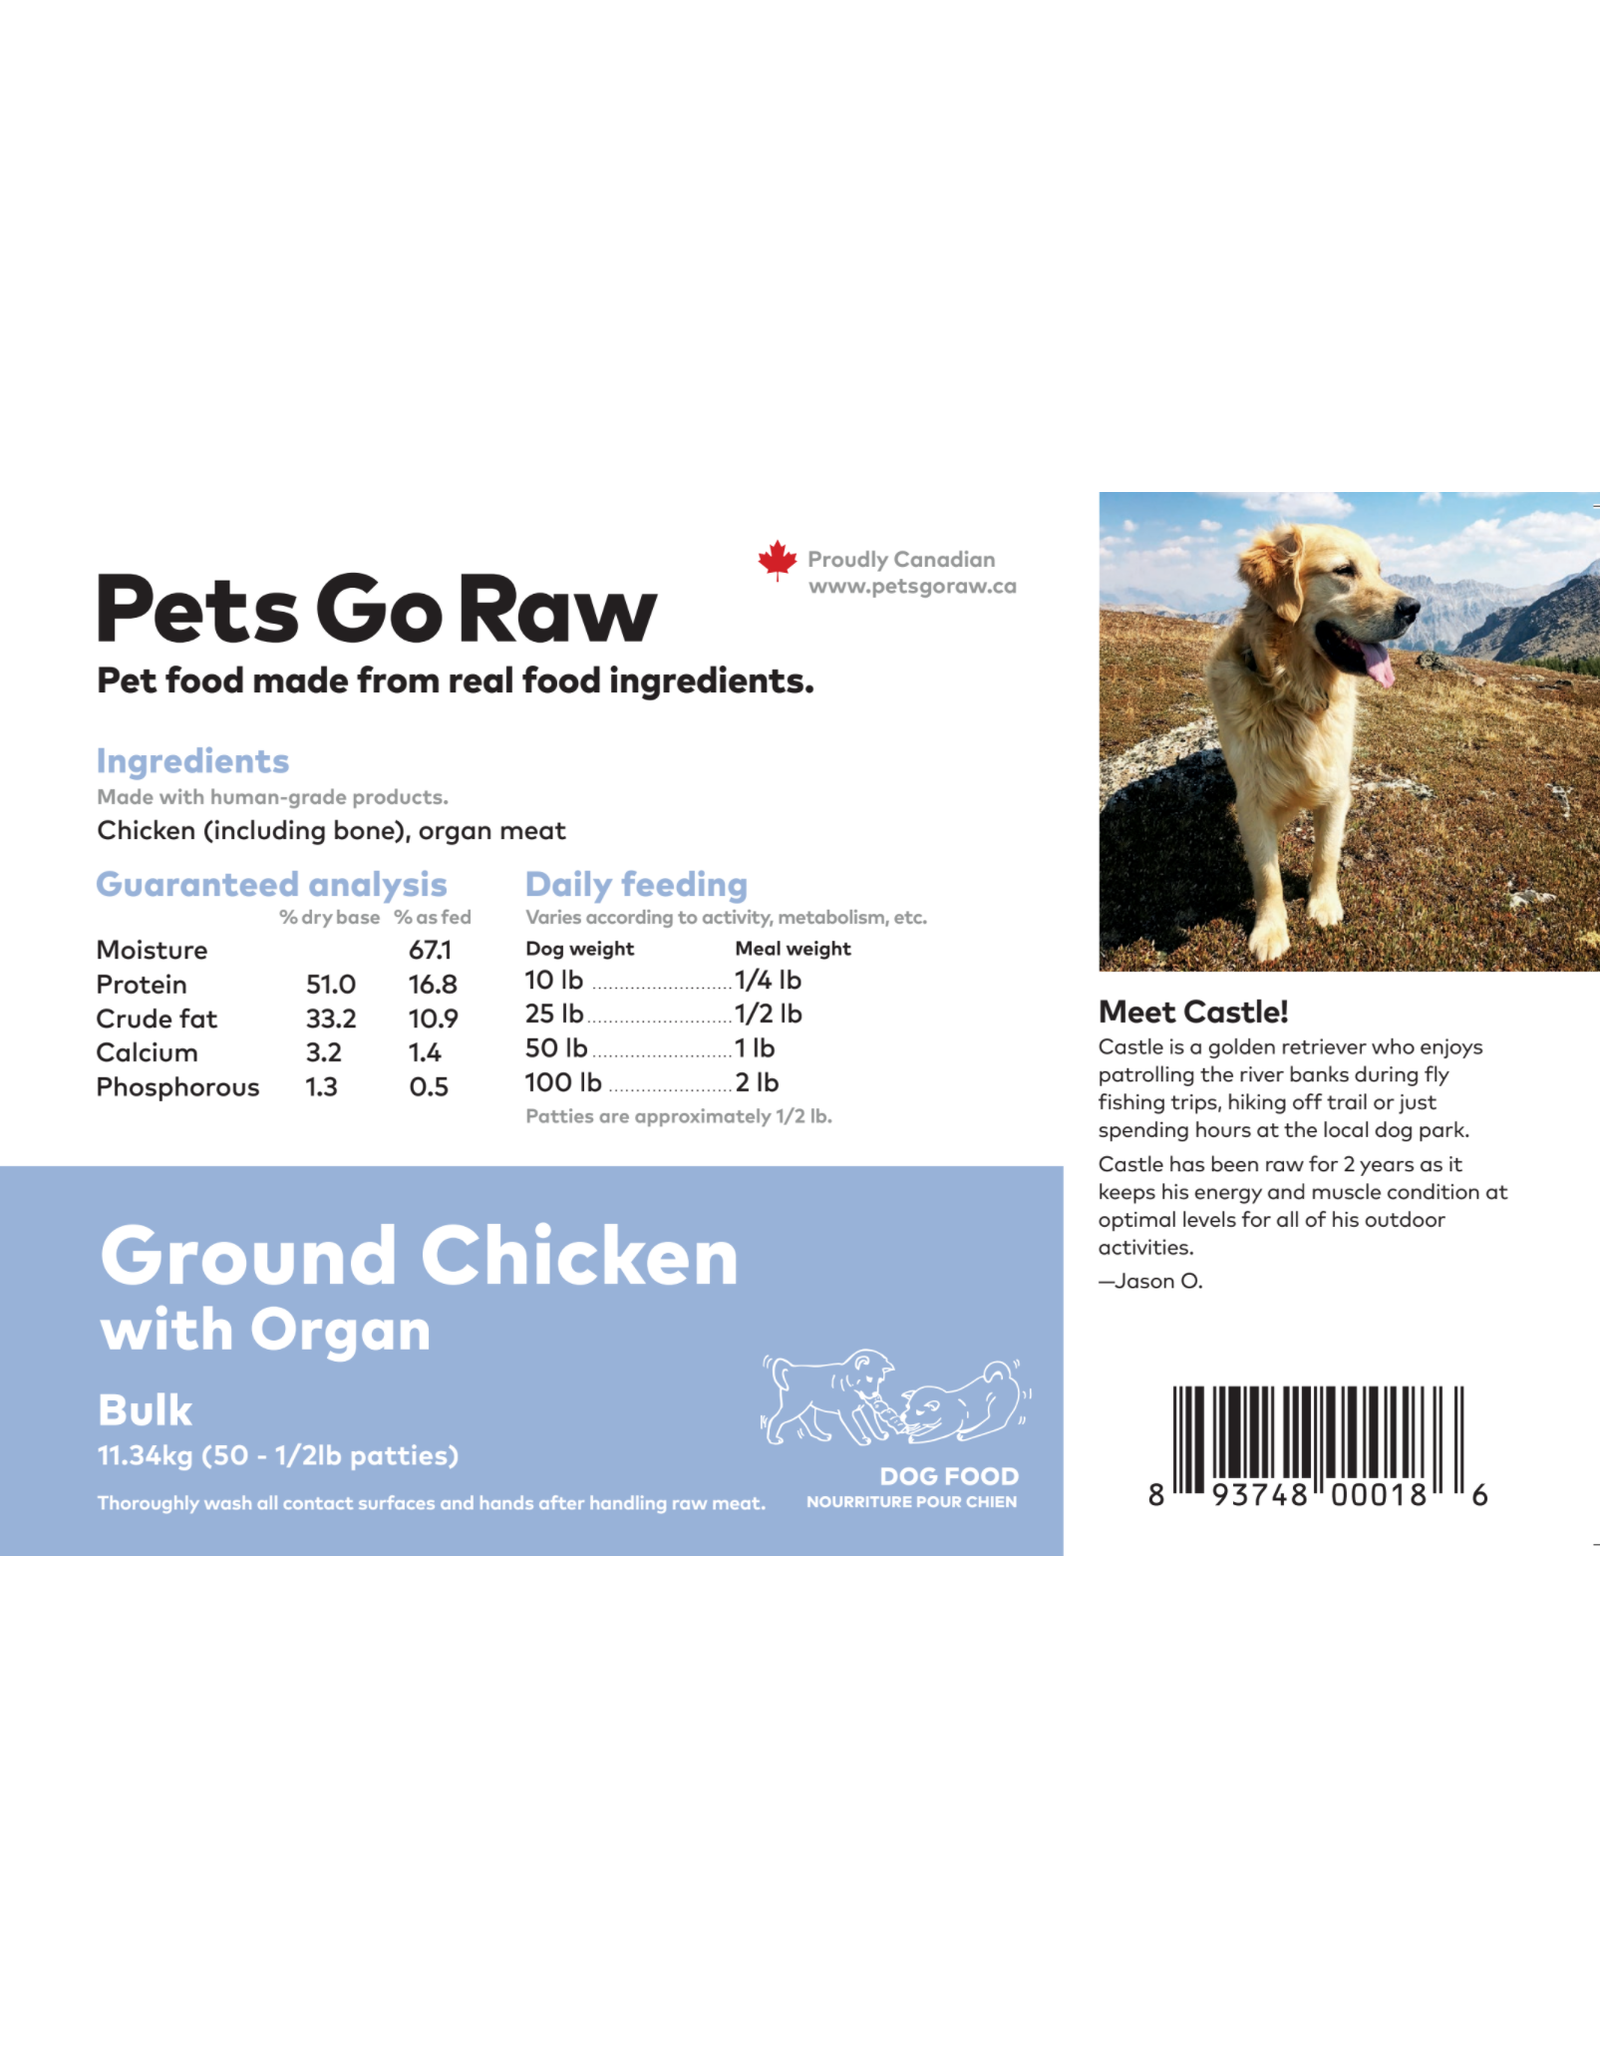 Pets Go Raw Ground Chicken with Organ Meat 25lb box (appox 50 patties)